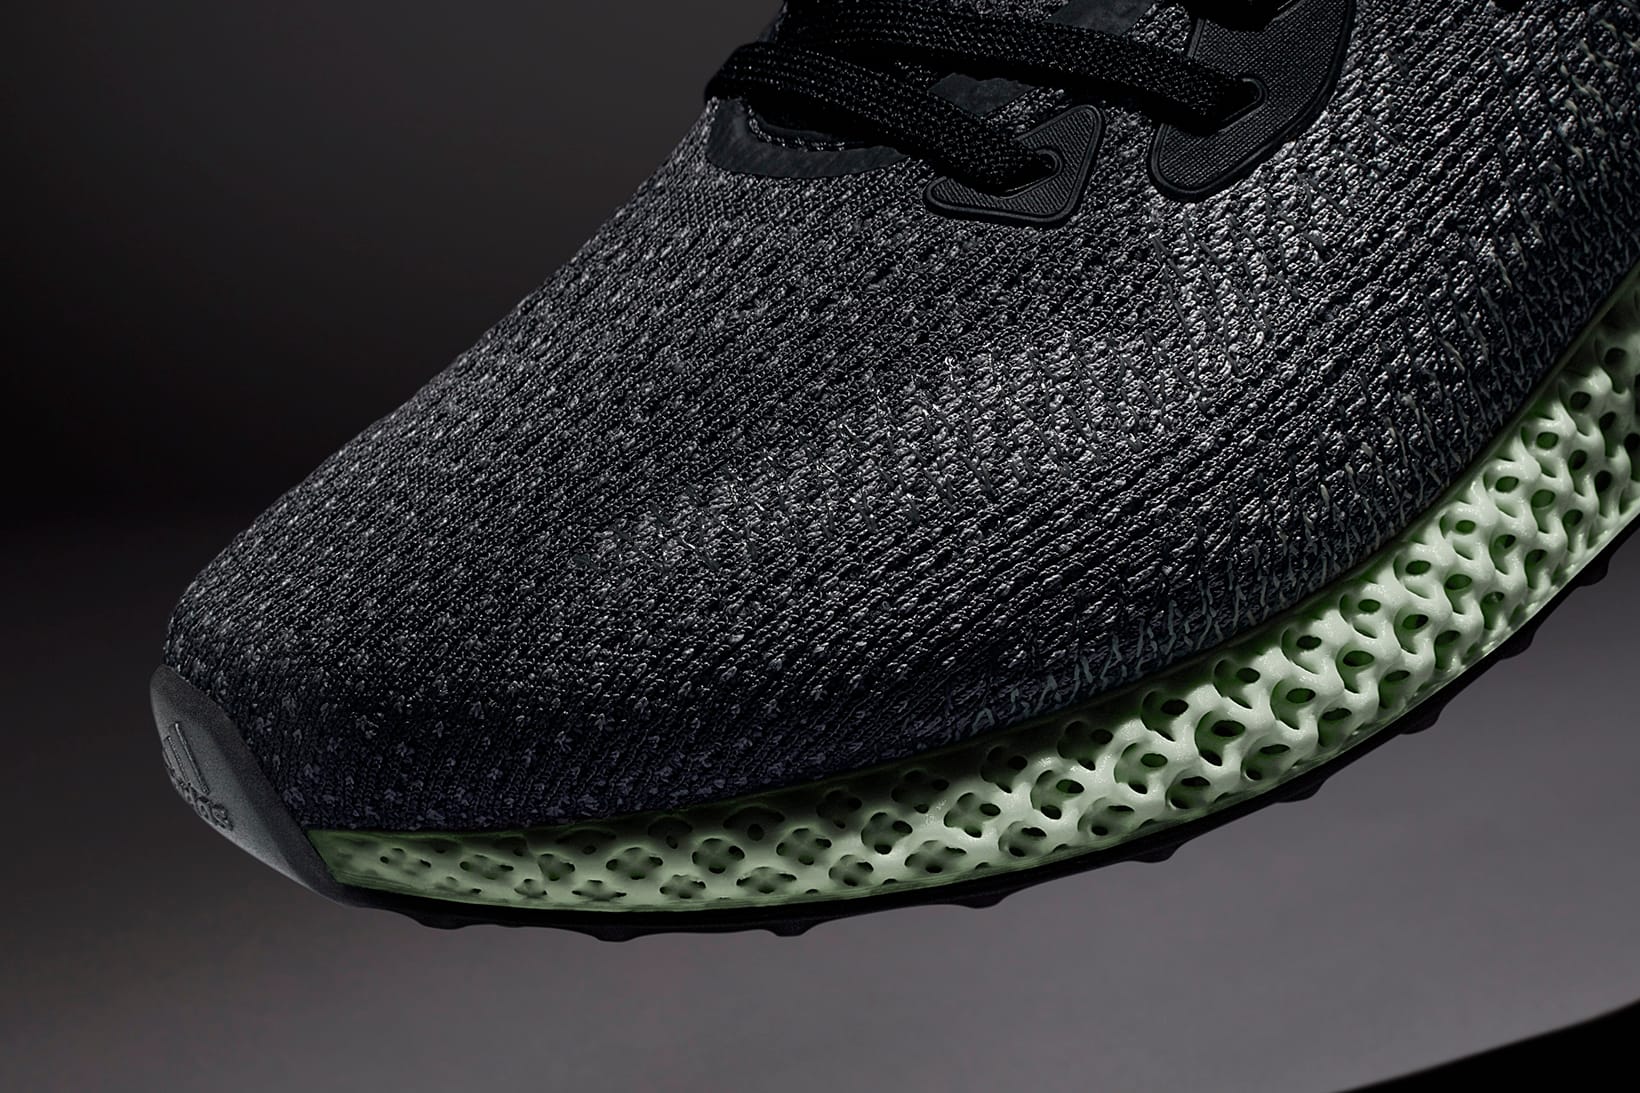 Adidas AlphaEdge 4D running shoes review: The soul lies in the midsole |  Reviews - Business Standard